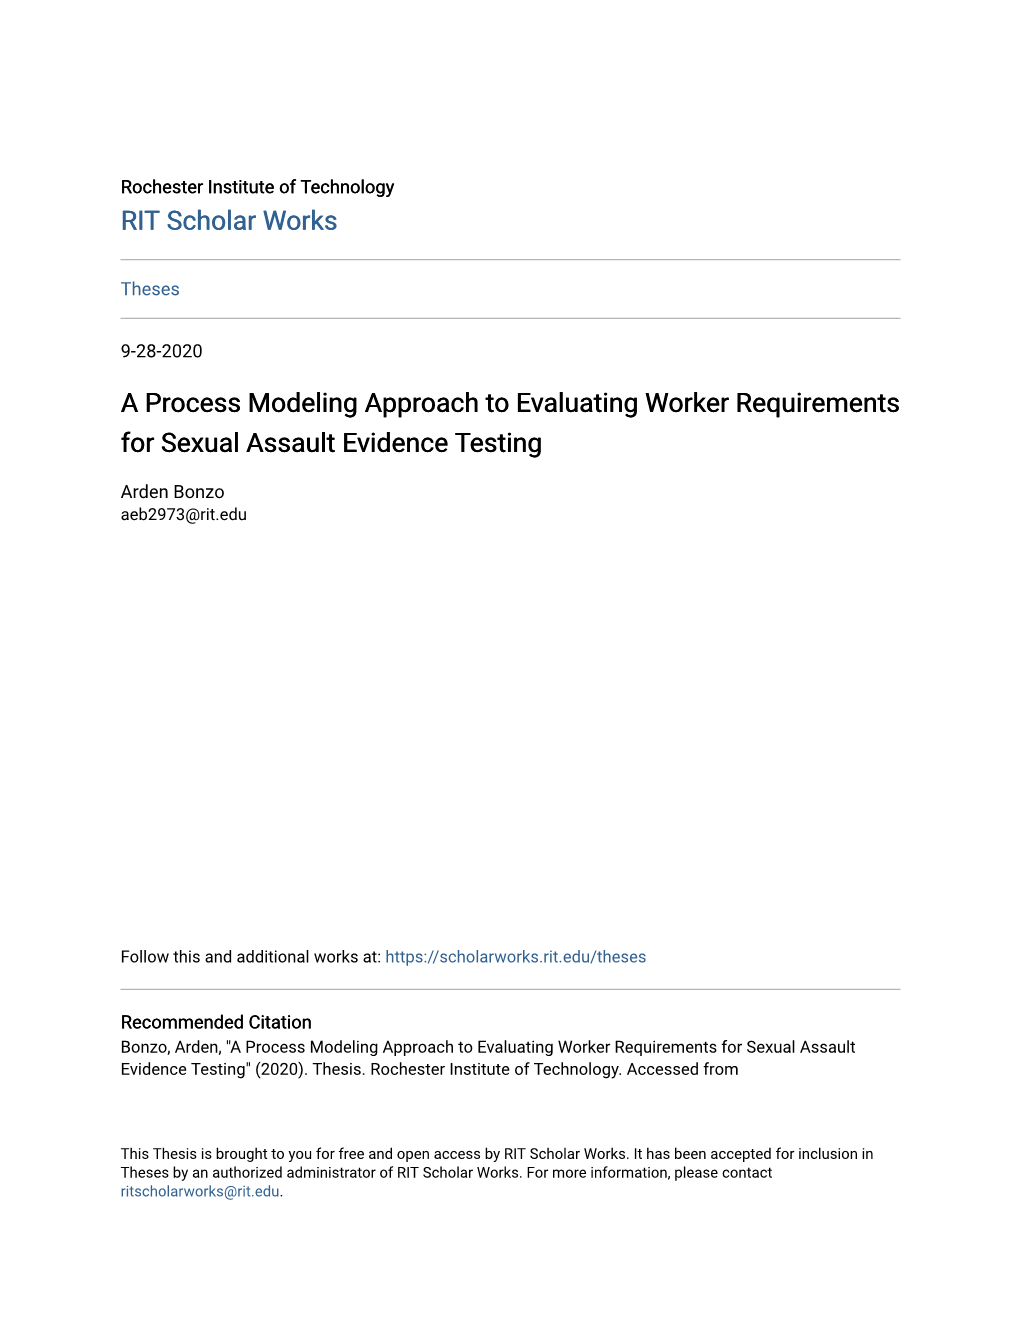 A Process Modeling Approach to Evaluating Worker Requirements for Sexual Assault Evidence Testing